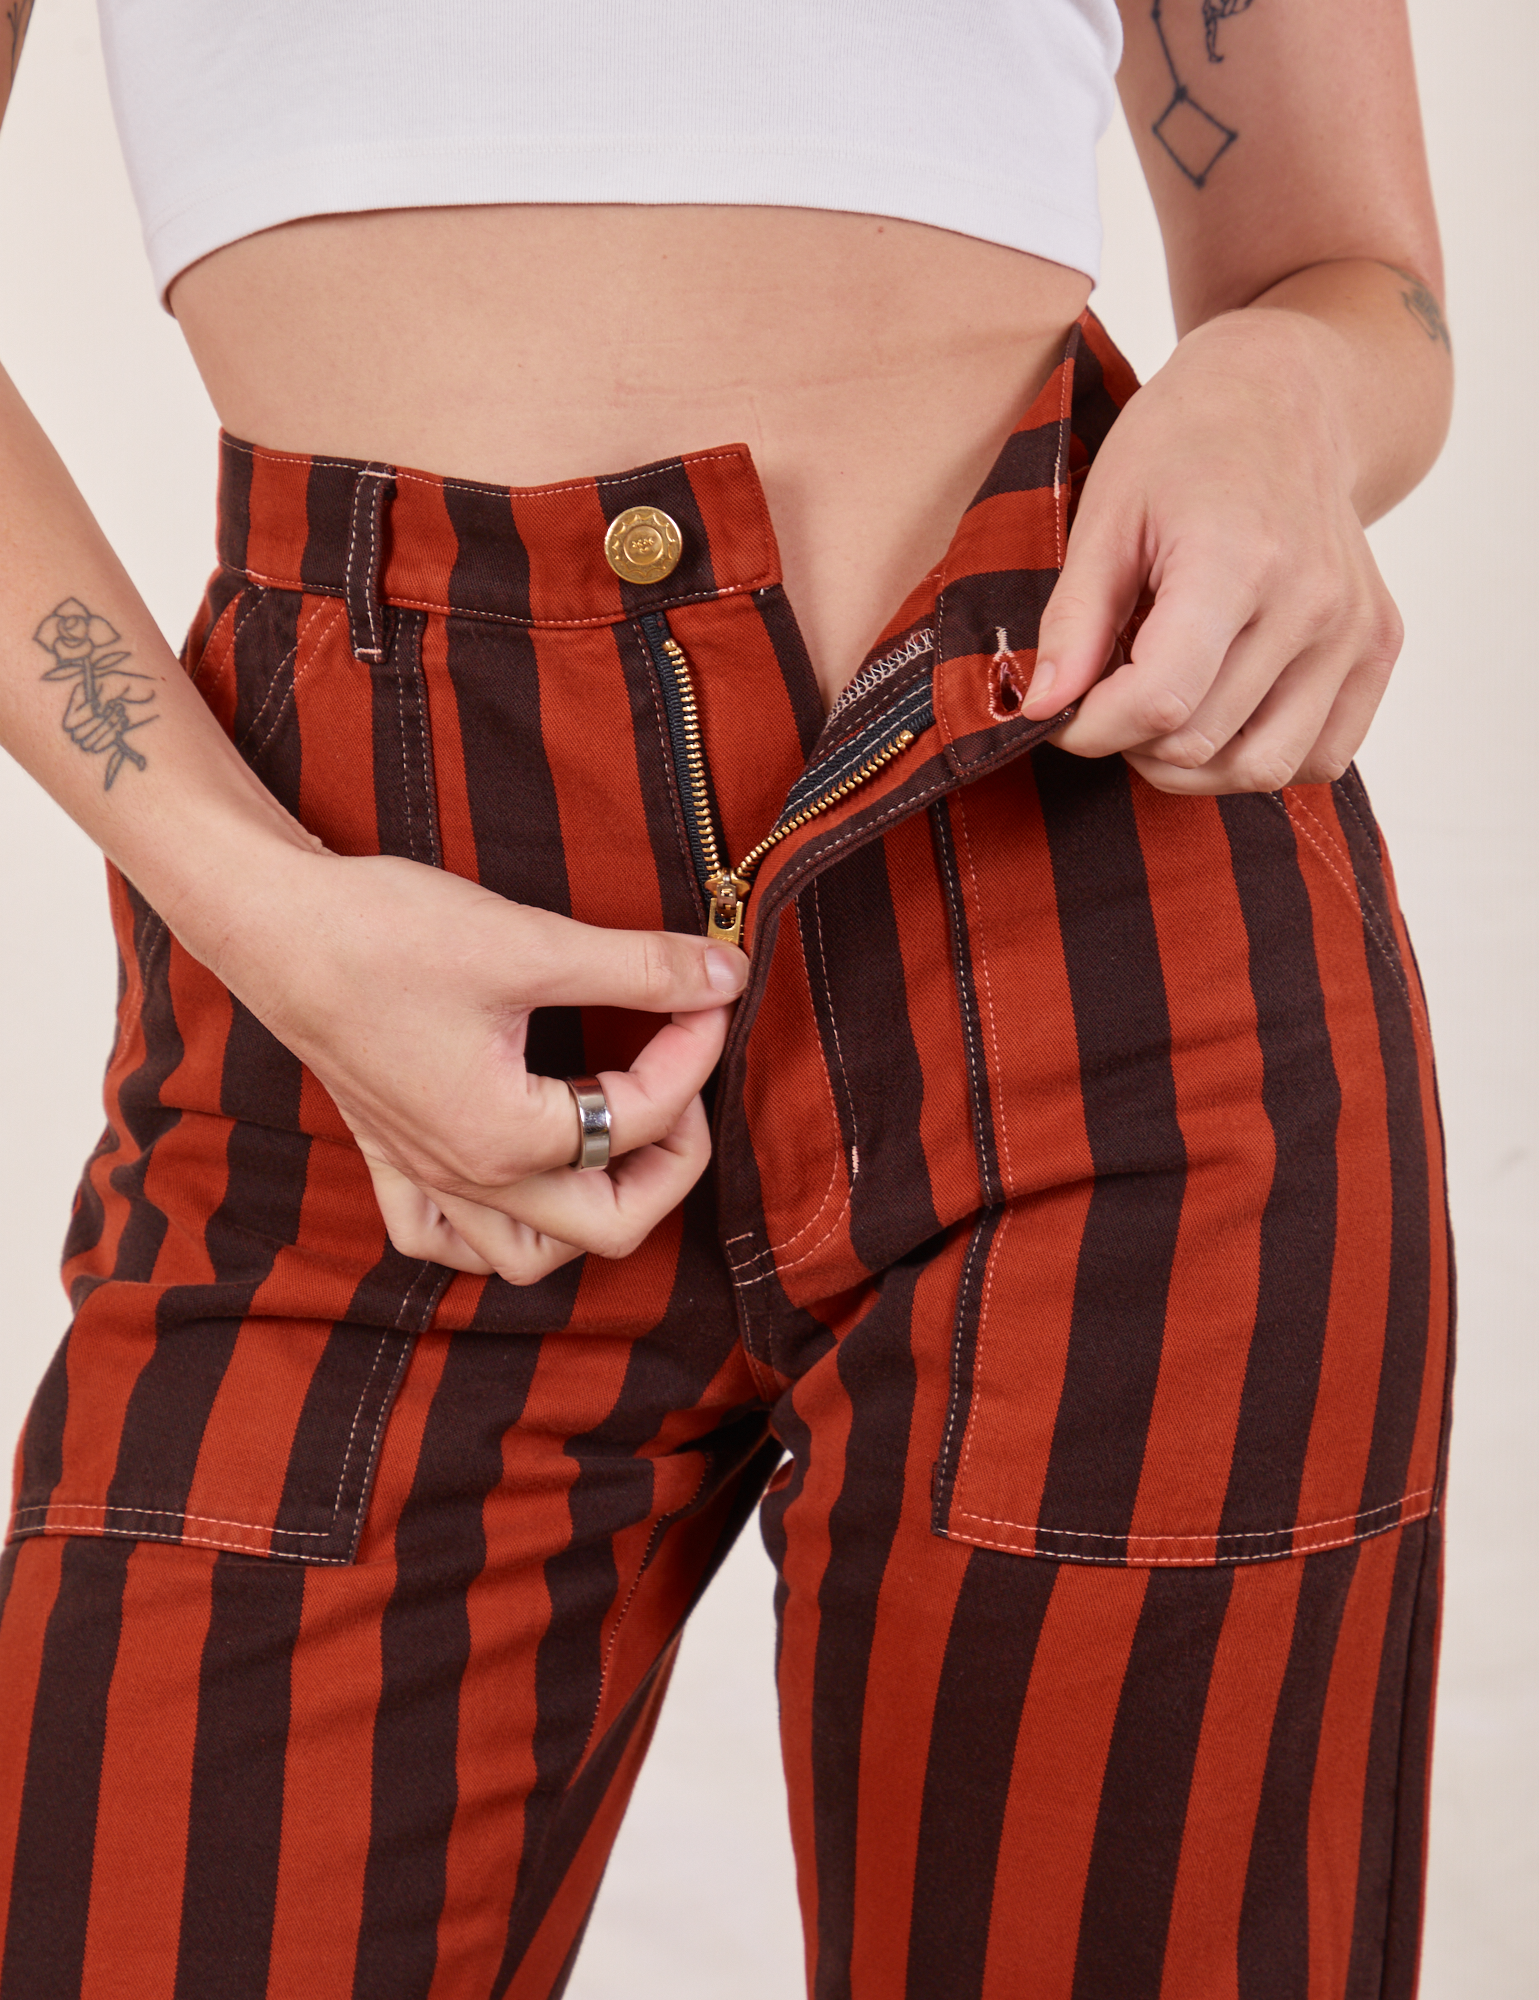 Black Striped Work Pants in Paprika front close up. Alex is pulling on the zipper tab.